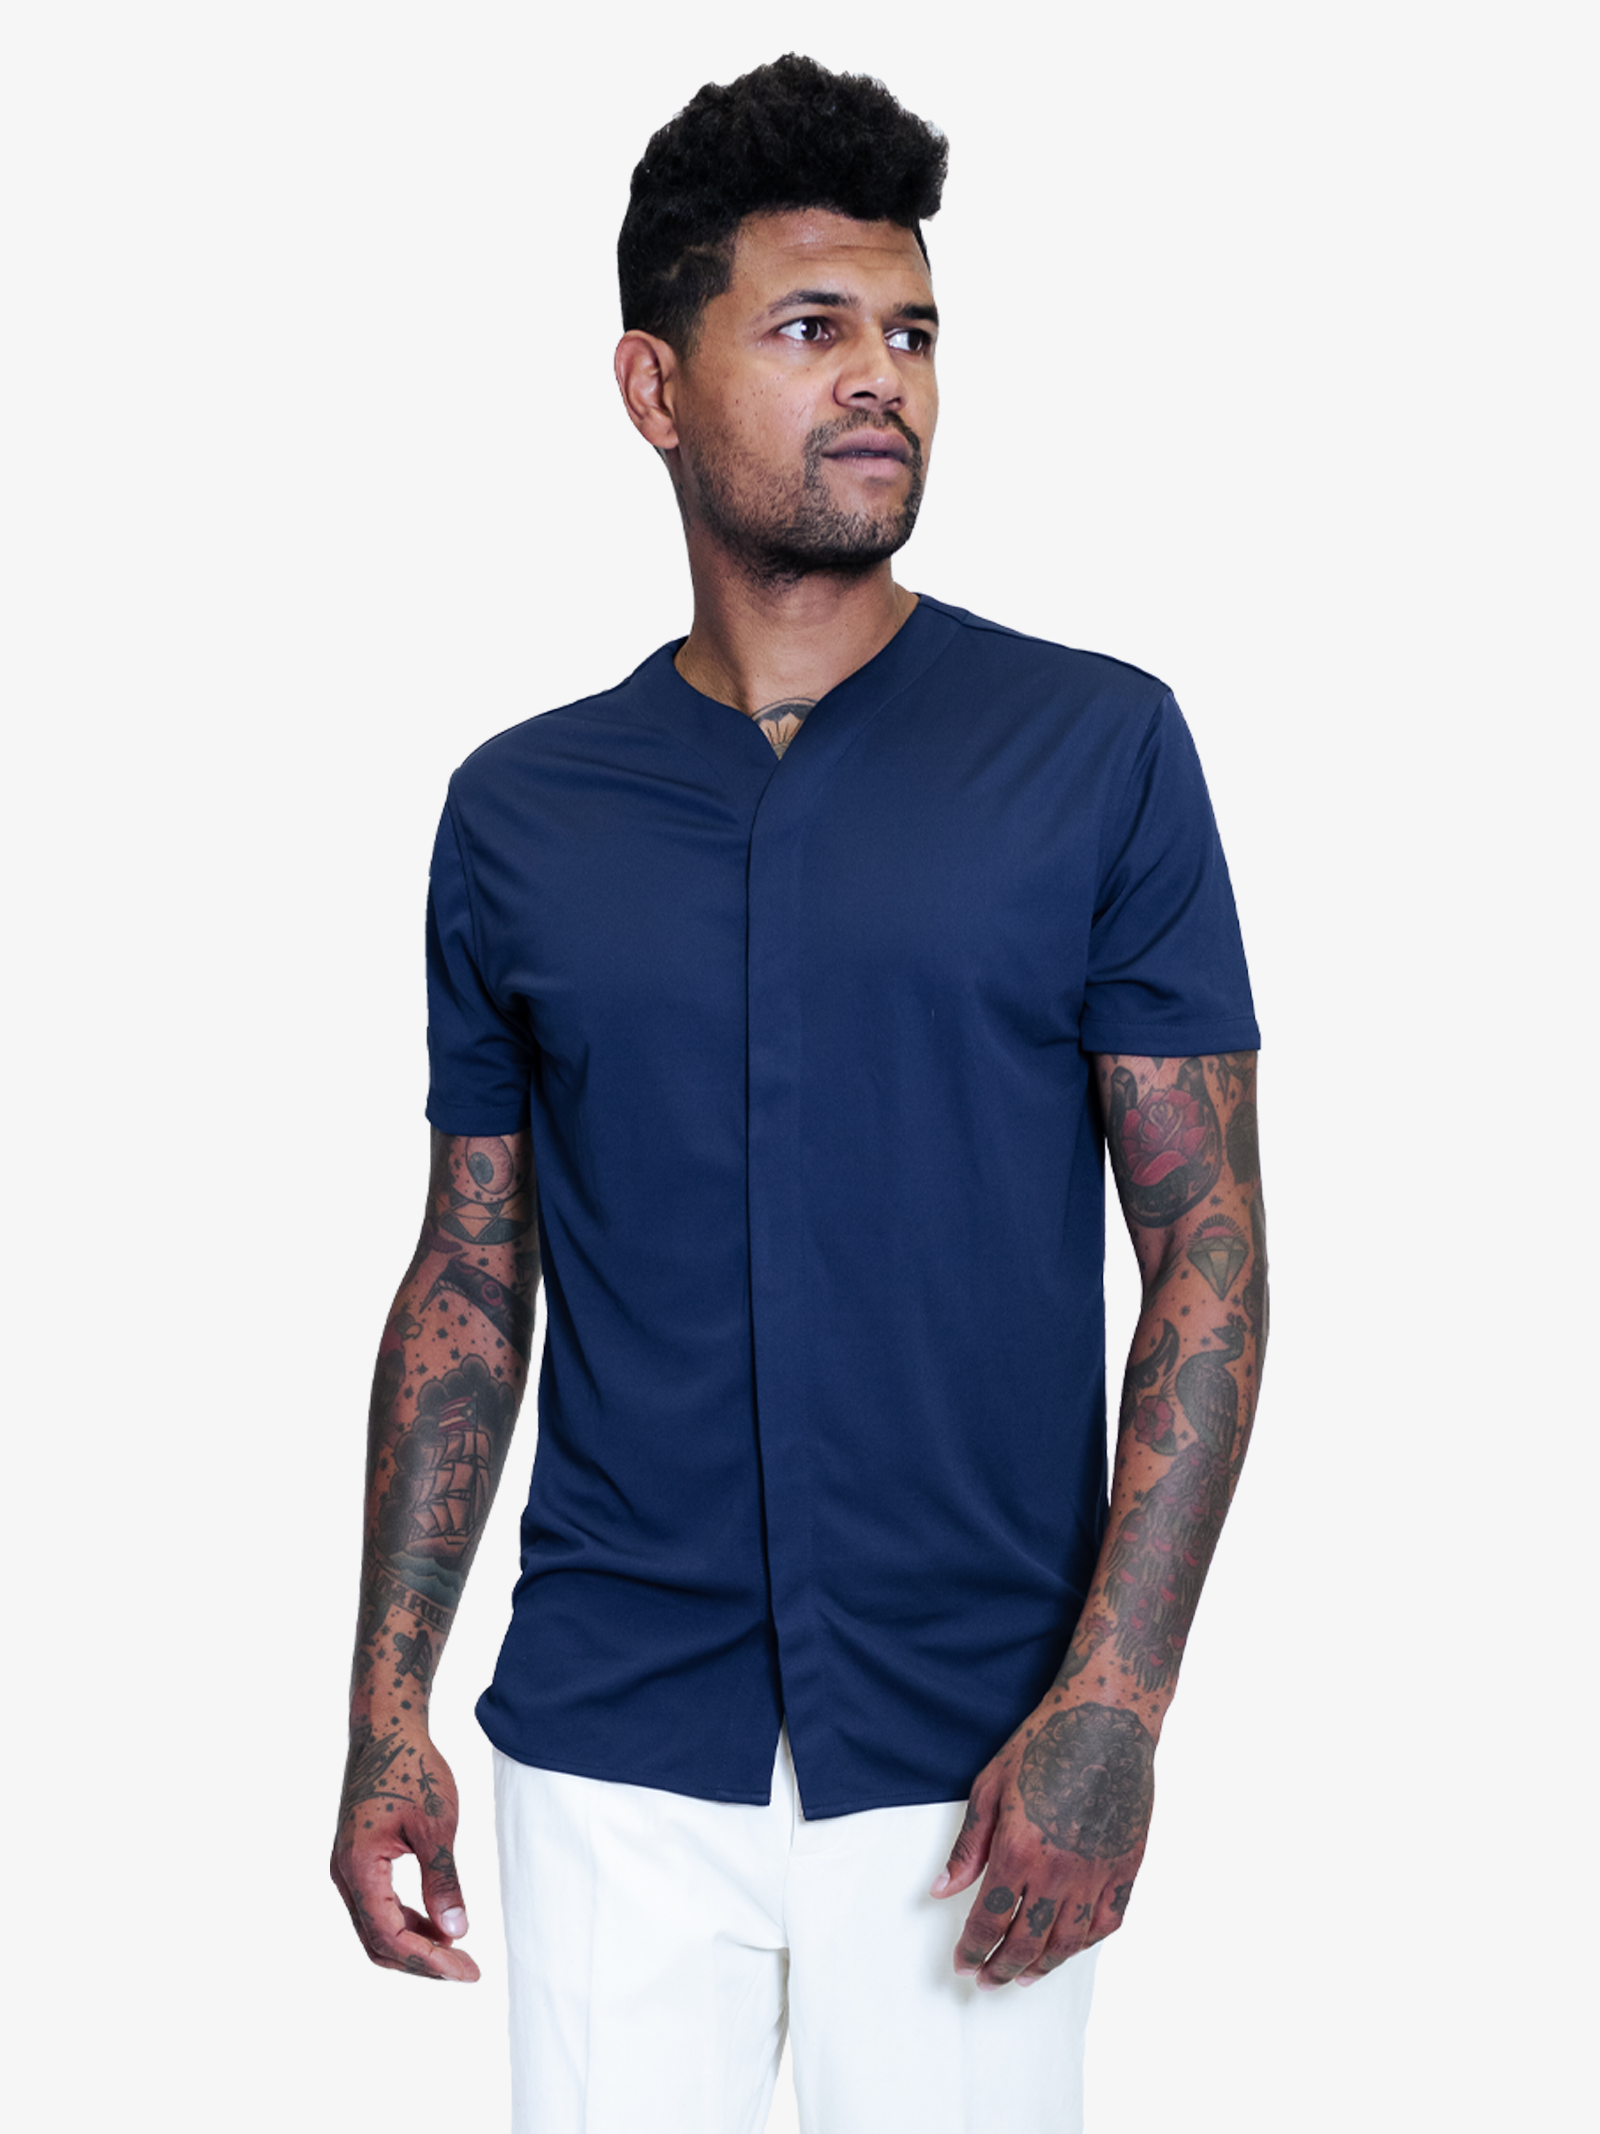 Man with tattoos wearing a dark blue collarless short sleeve shirt styled with white pants 